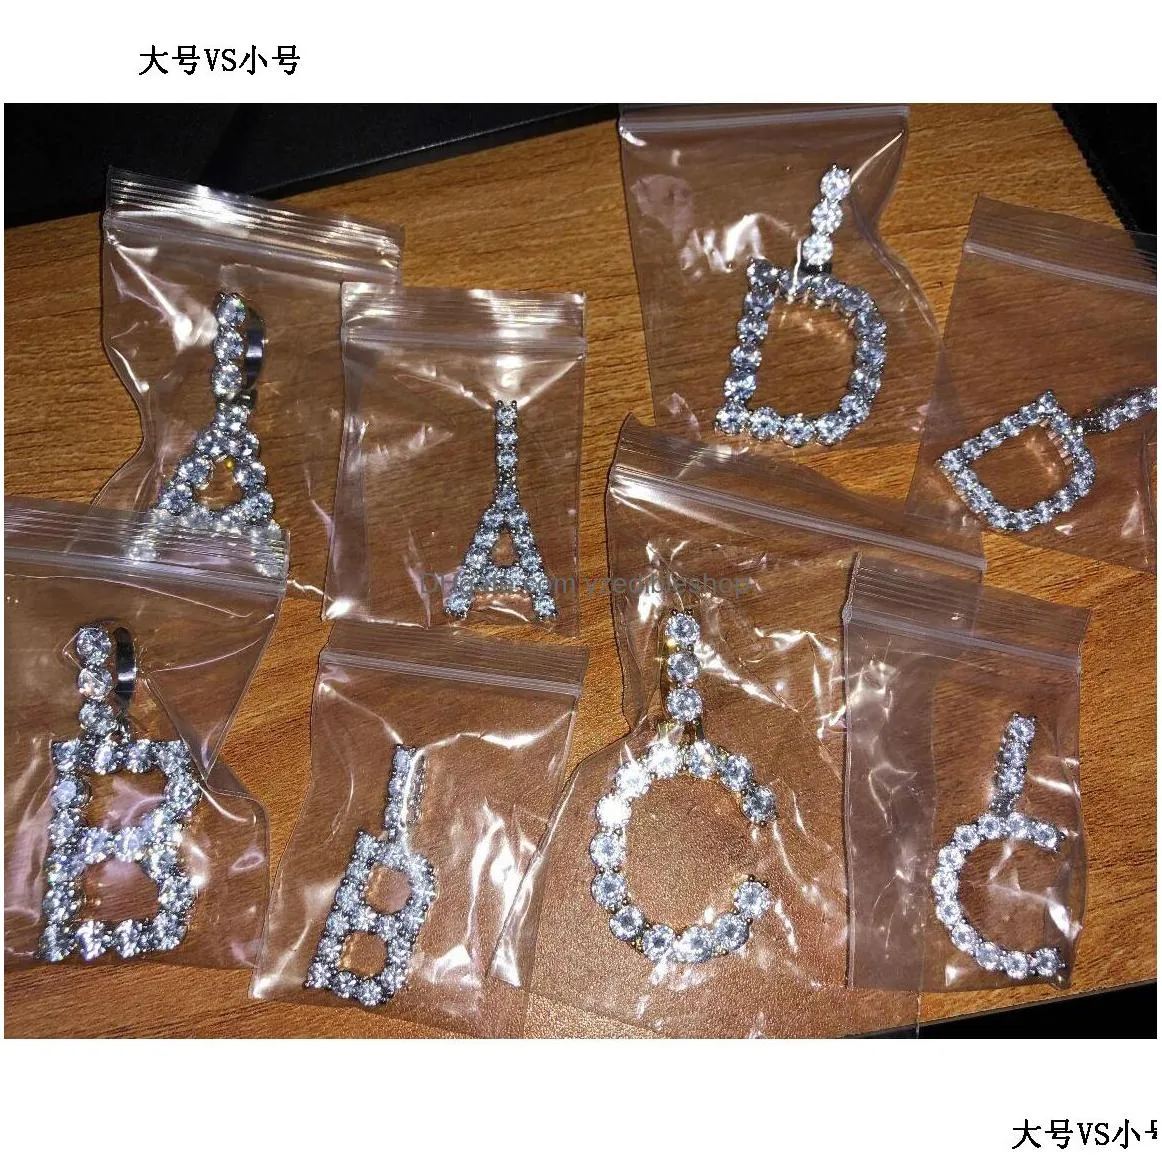 a-z initial letter custom name pendant necklace for men and women with 24inch chain english letter pendants